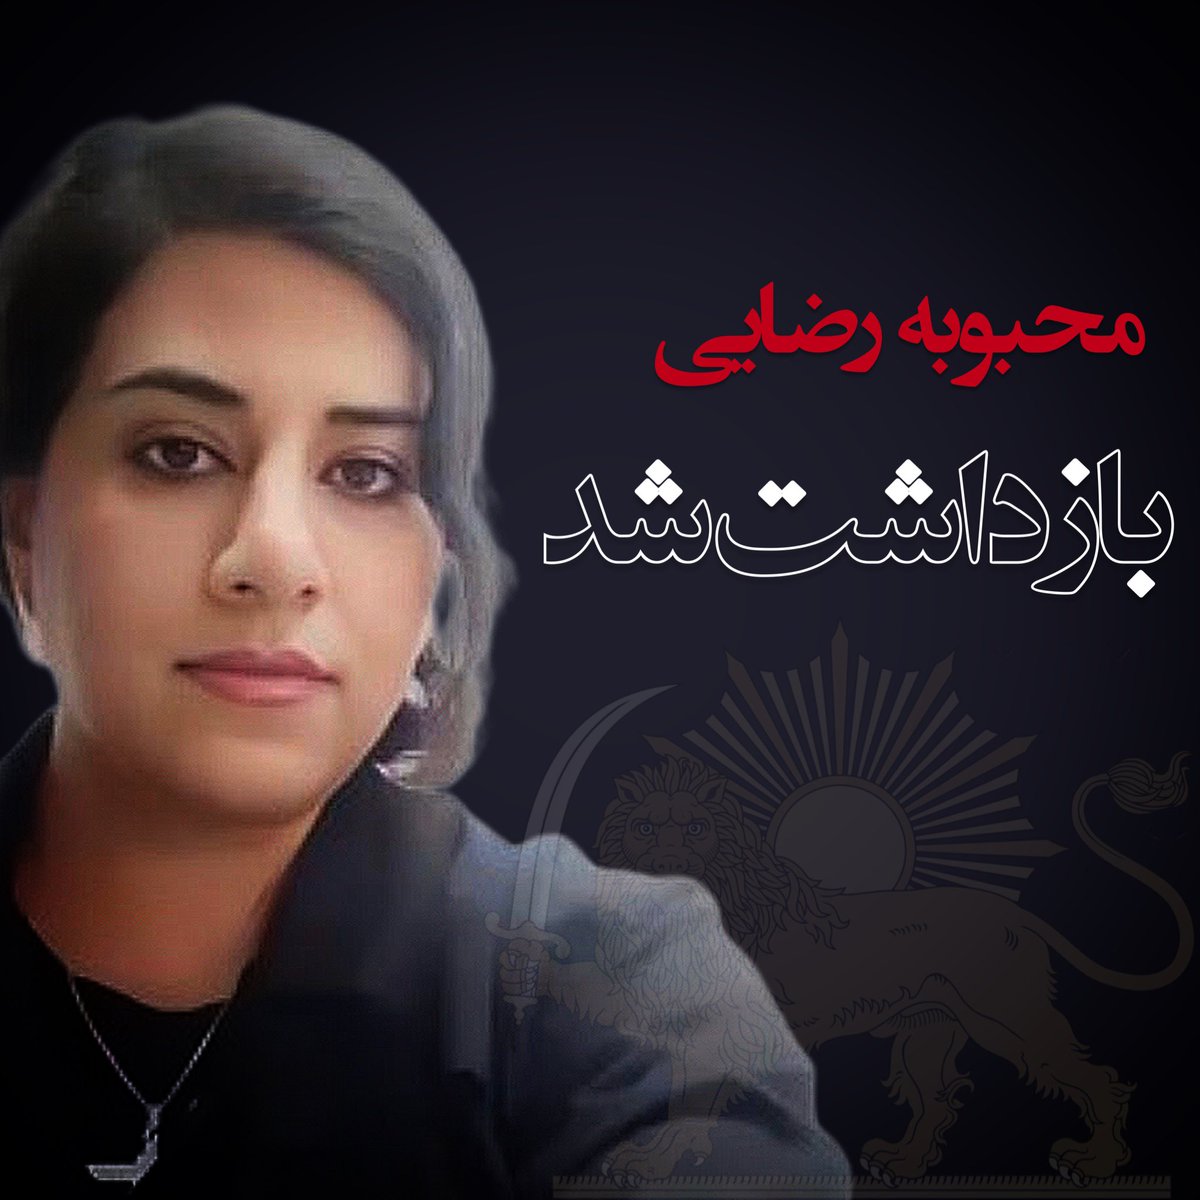 #MahboubehRezaei, a former political prisoner and advocate of the monarchy system, has been apprehended by the intelligence forces of the Islamic Republic. She has been subsequently relocated to an undisclosed location.